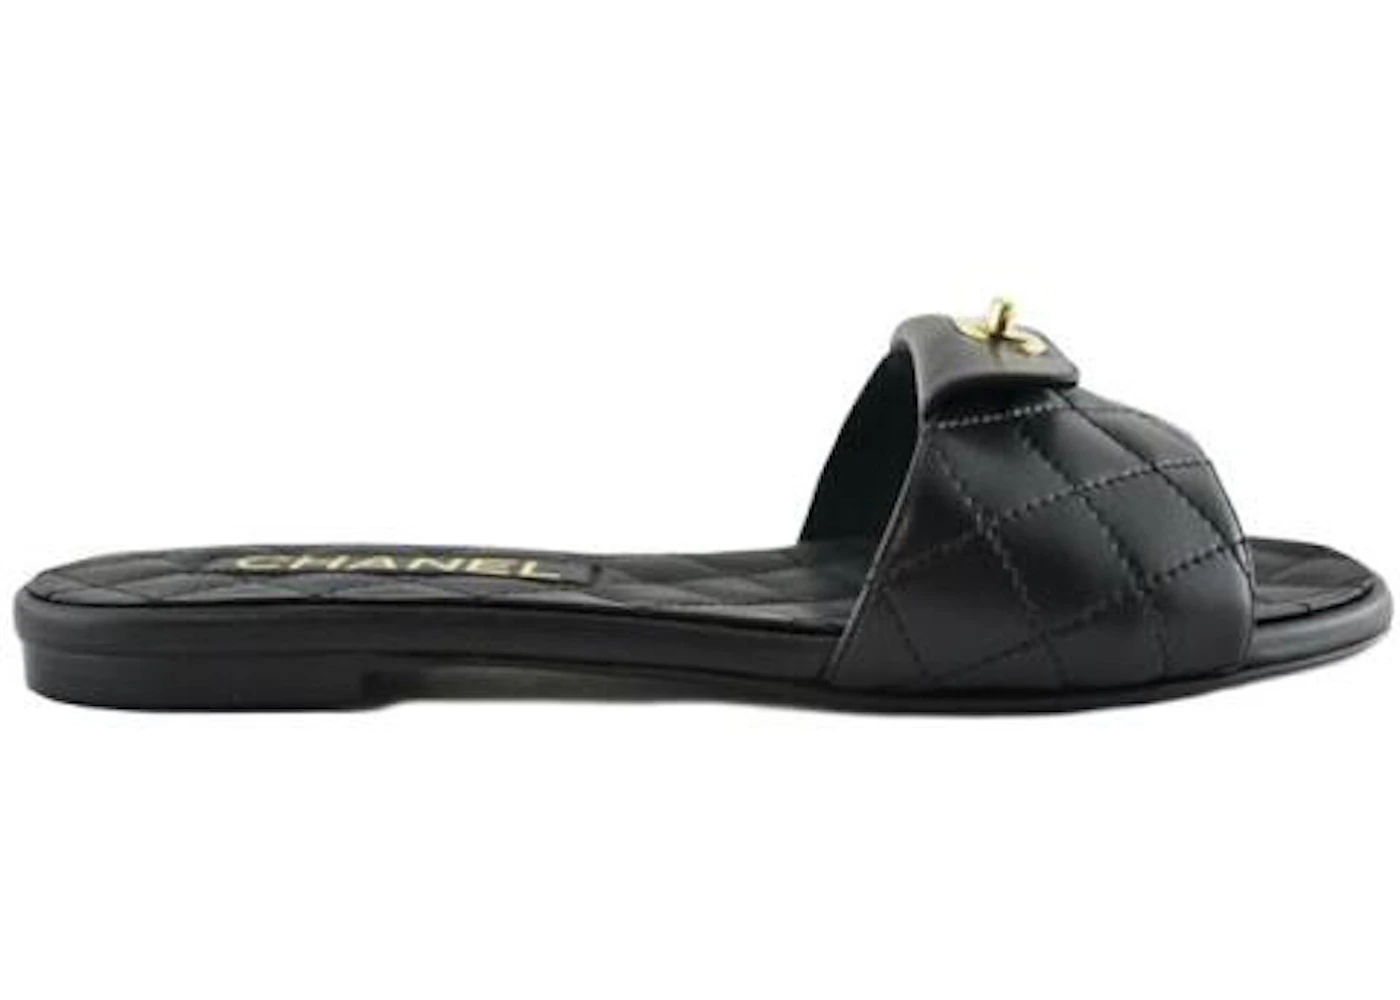 Chanel Quilted Mule Sandal Black Leather